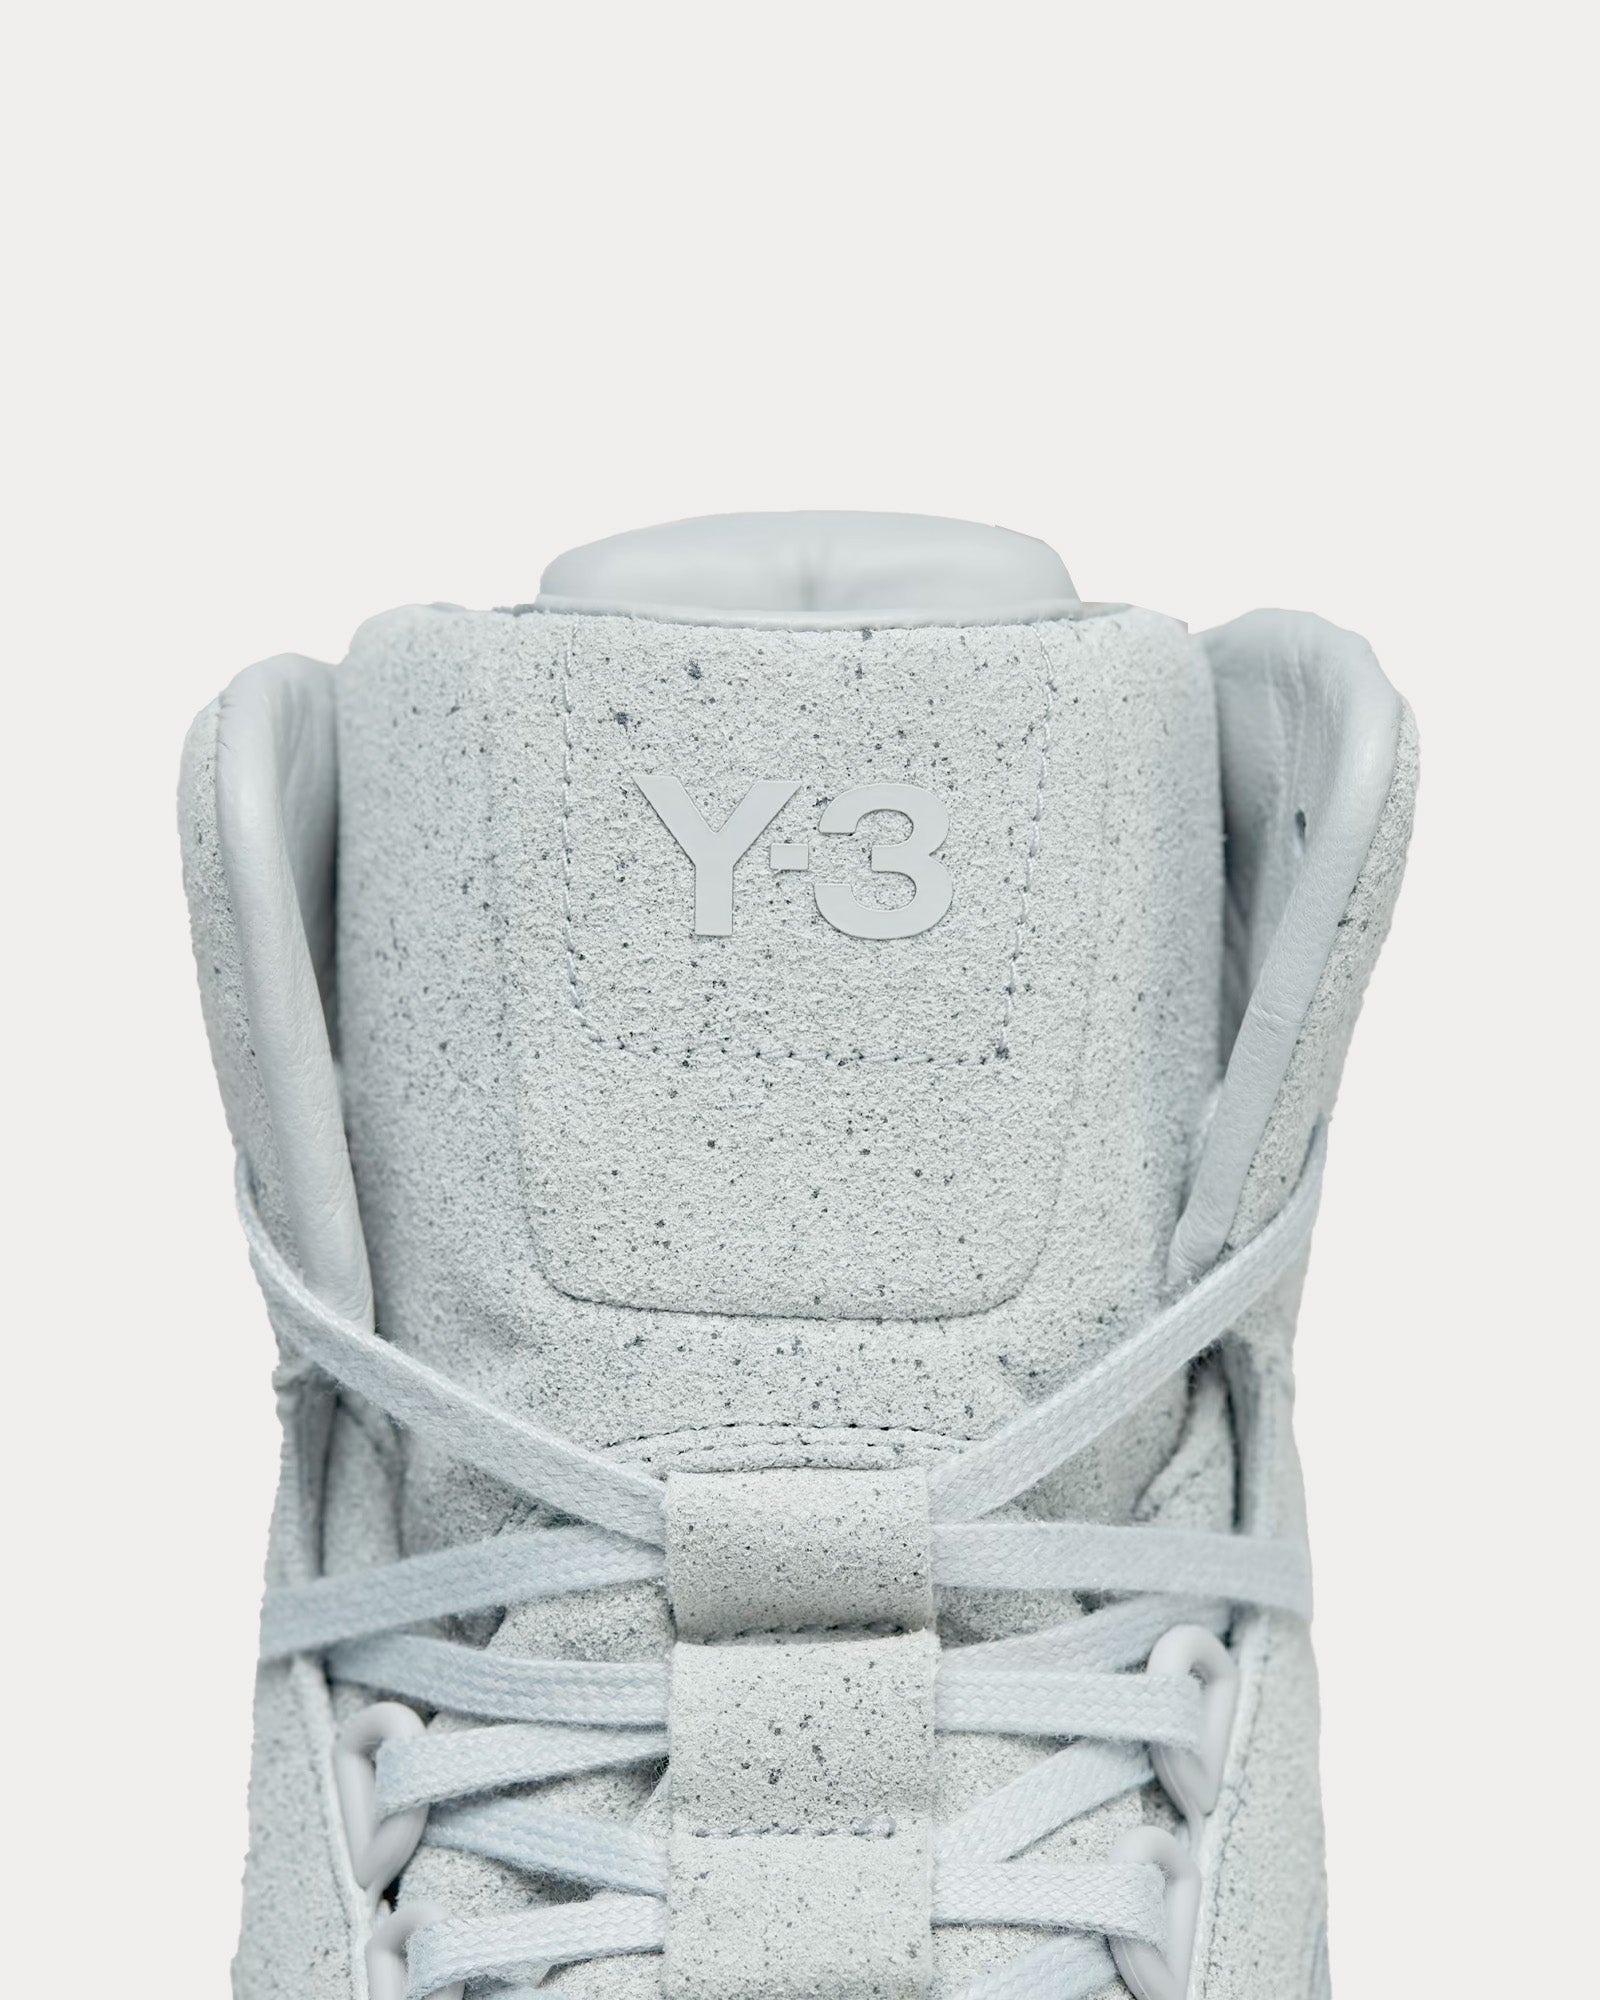 Y-3 - GSG9 Clear Onix / Clear Onix / Carbon High Top Sneakers